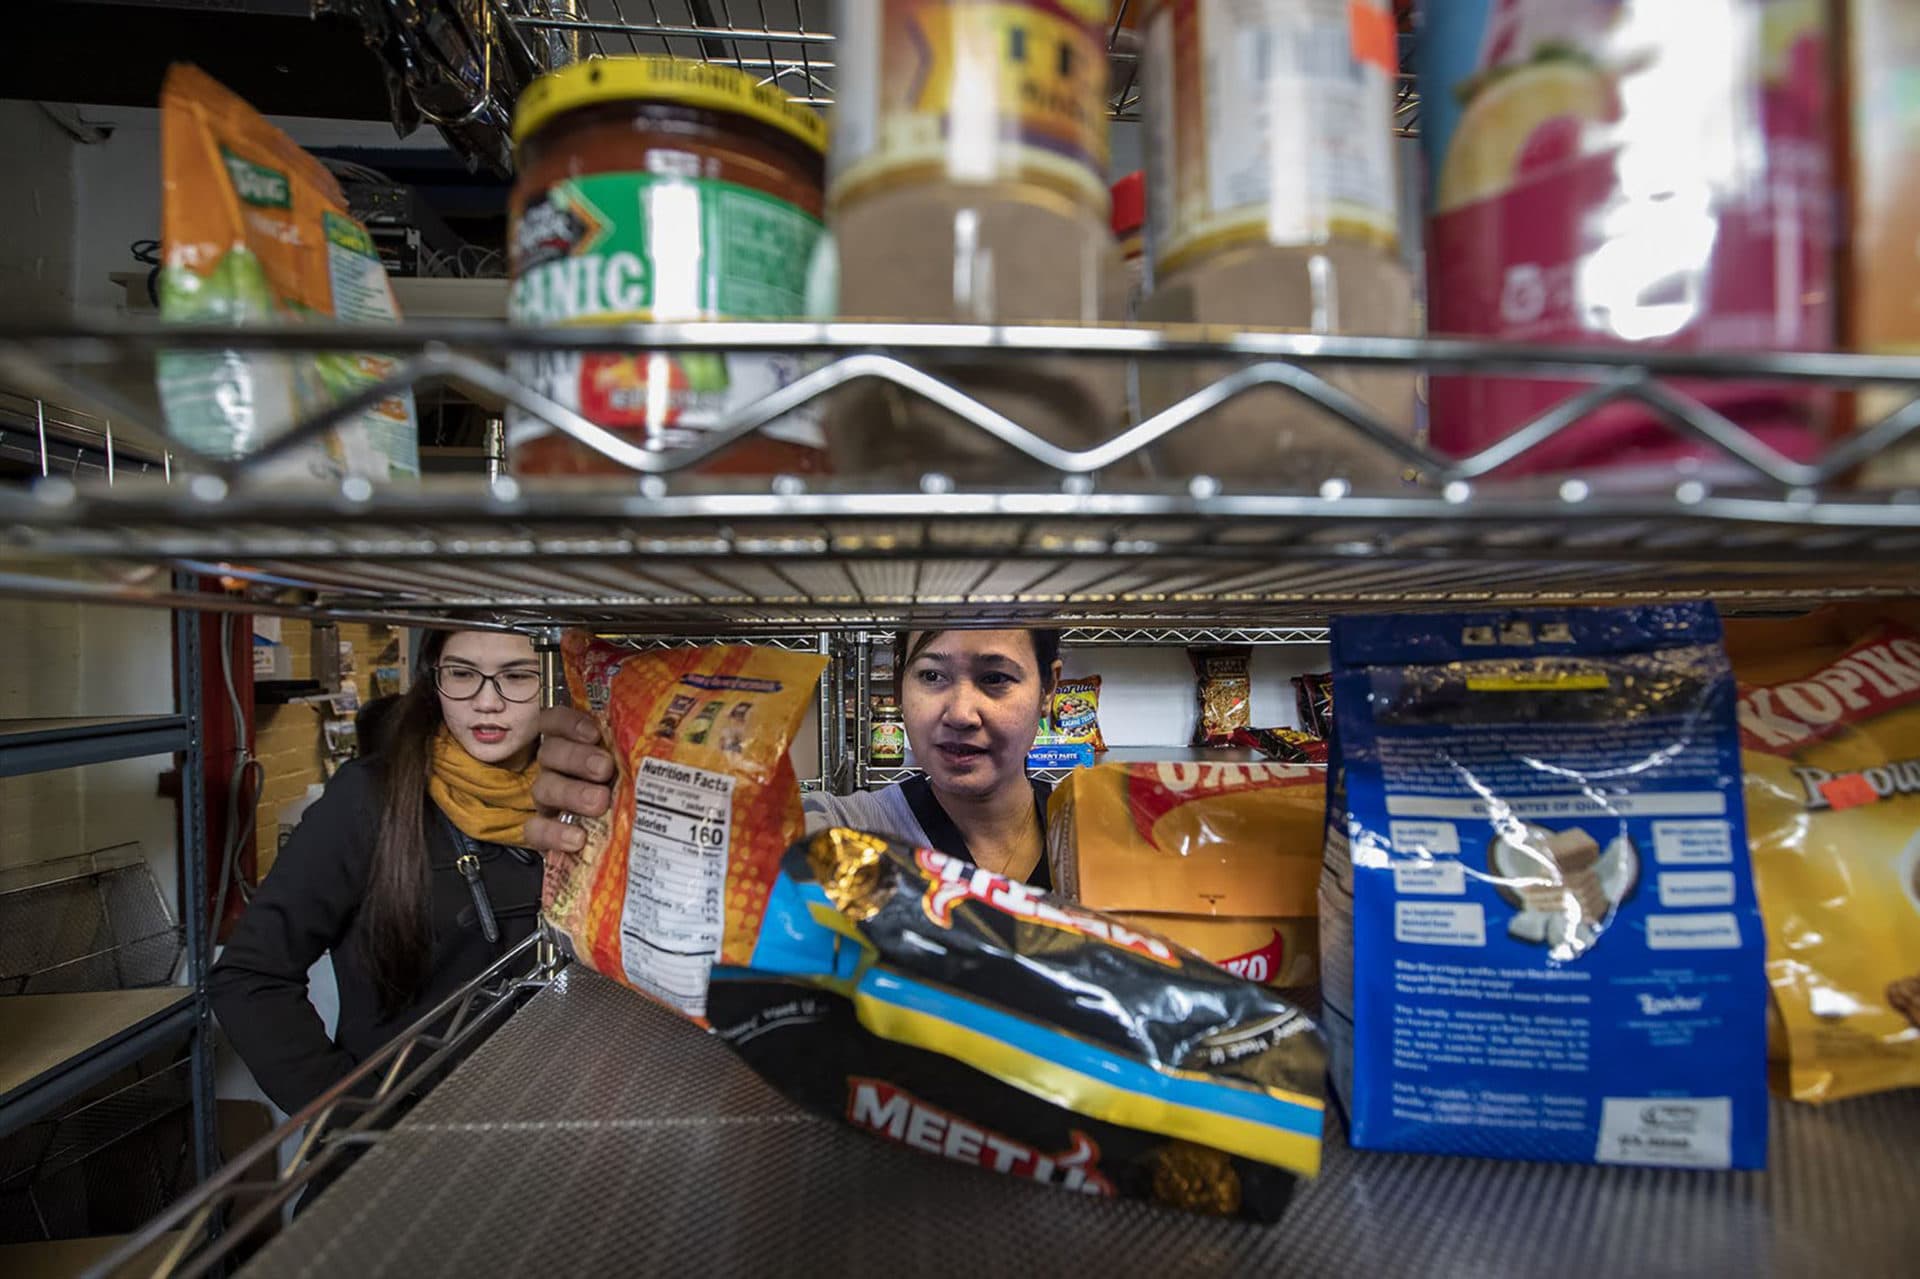 A woman grabs a bag of instant Thai tea from a shelf of many different imported items for sale at the Seafarers Mission store. (Jesse Costa/WBUR)